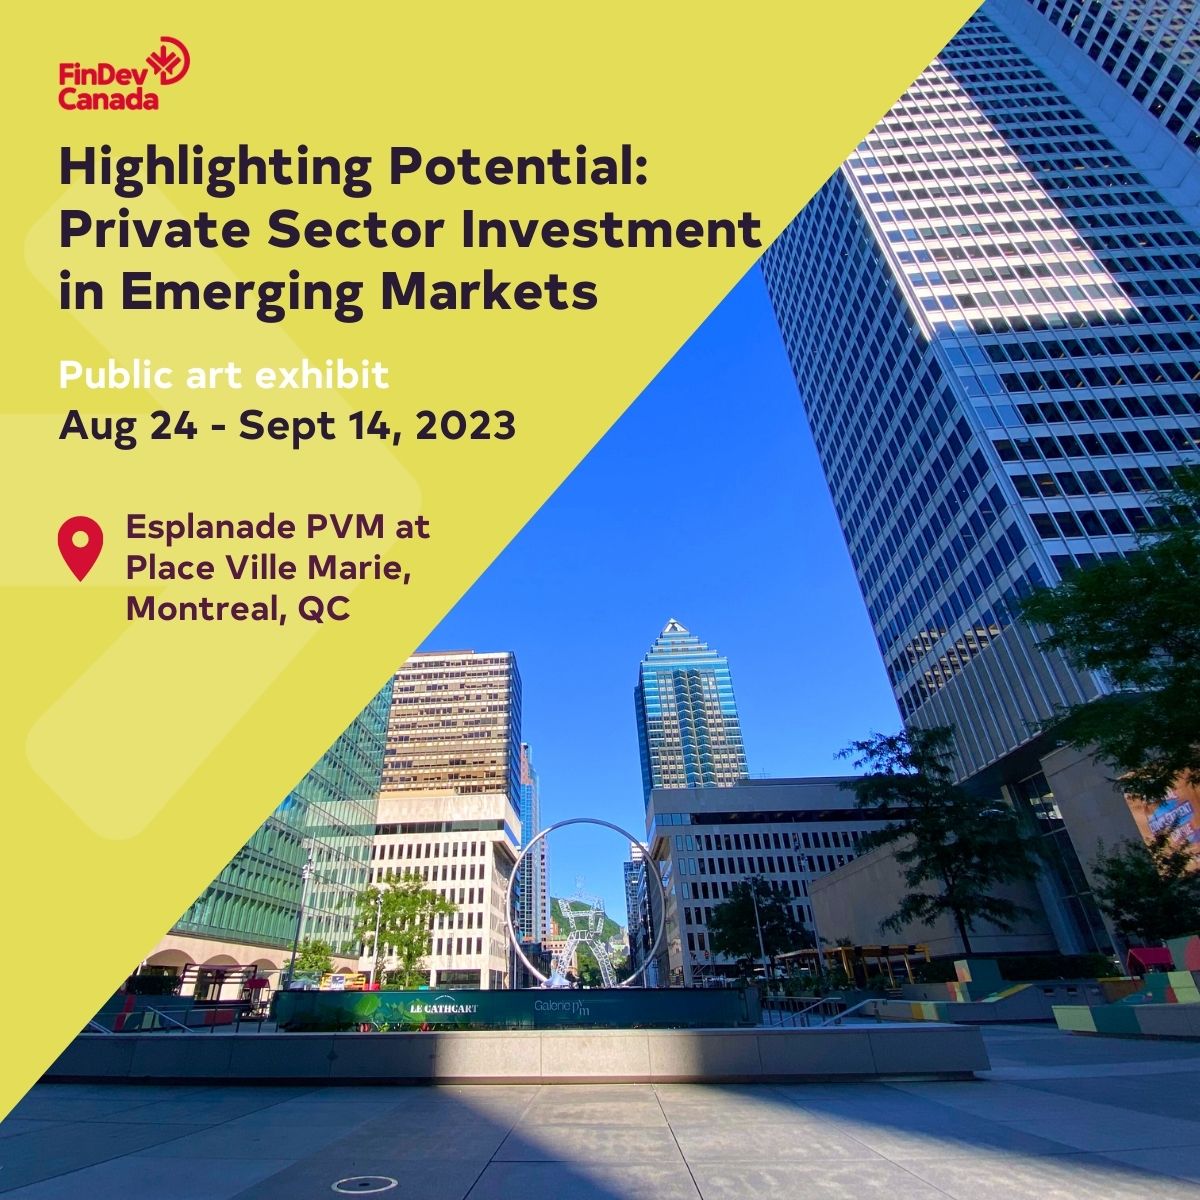 Highlighting Potential: Private Sector Investment in Emerging Markets